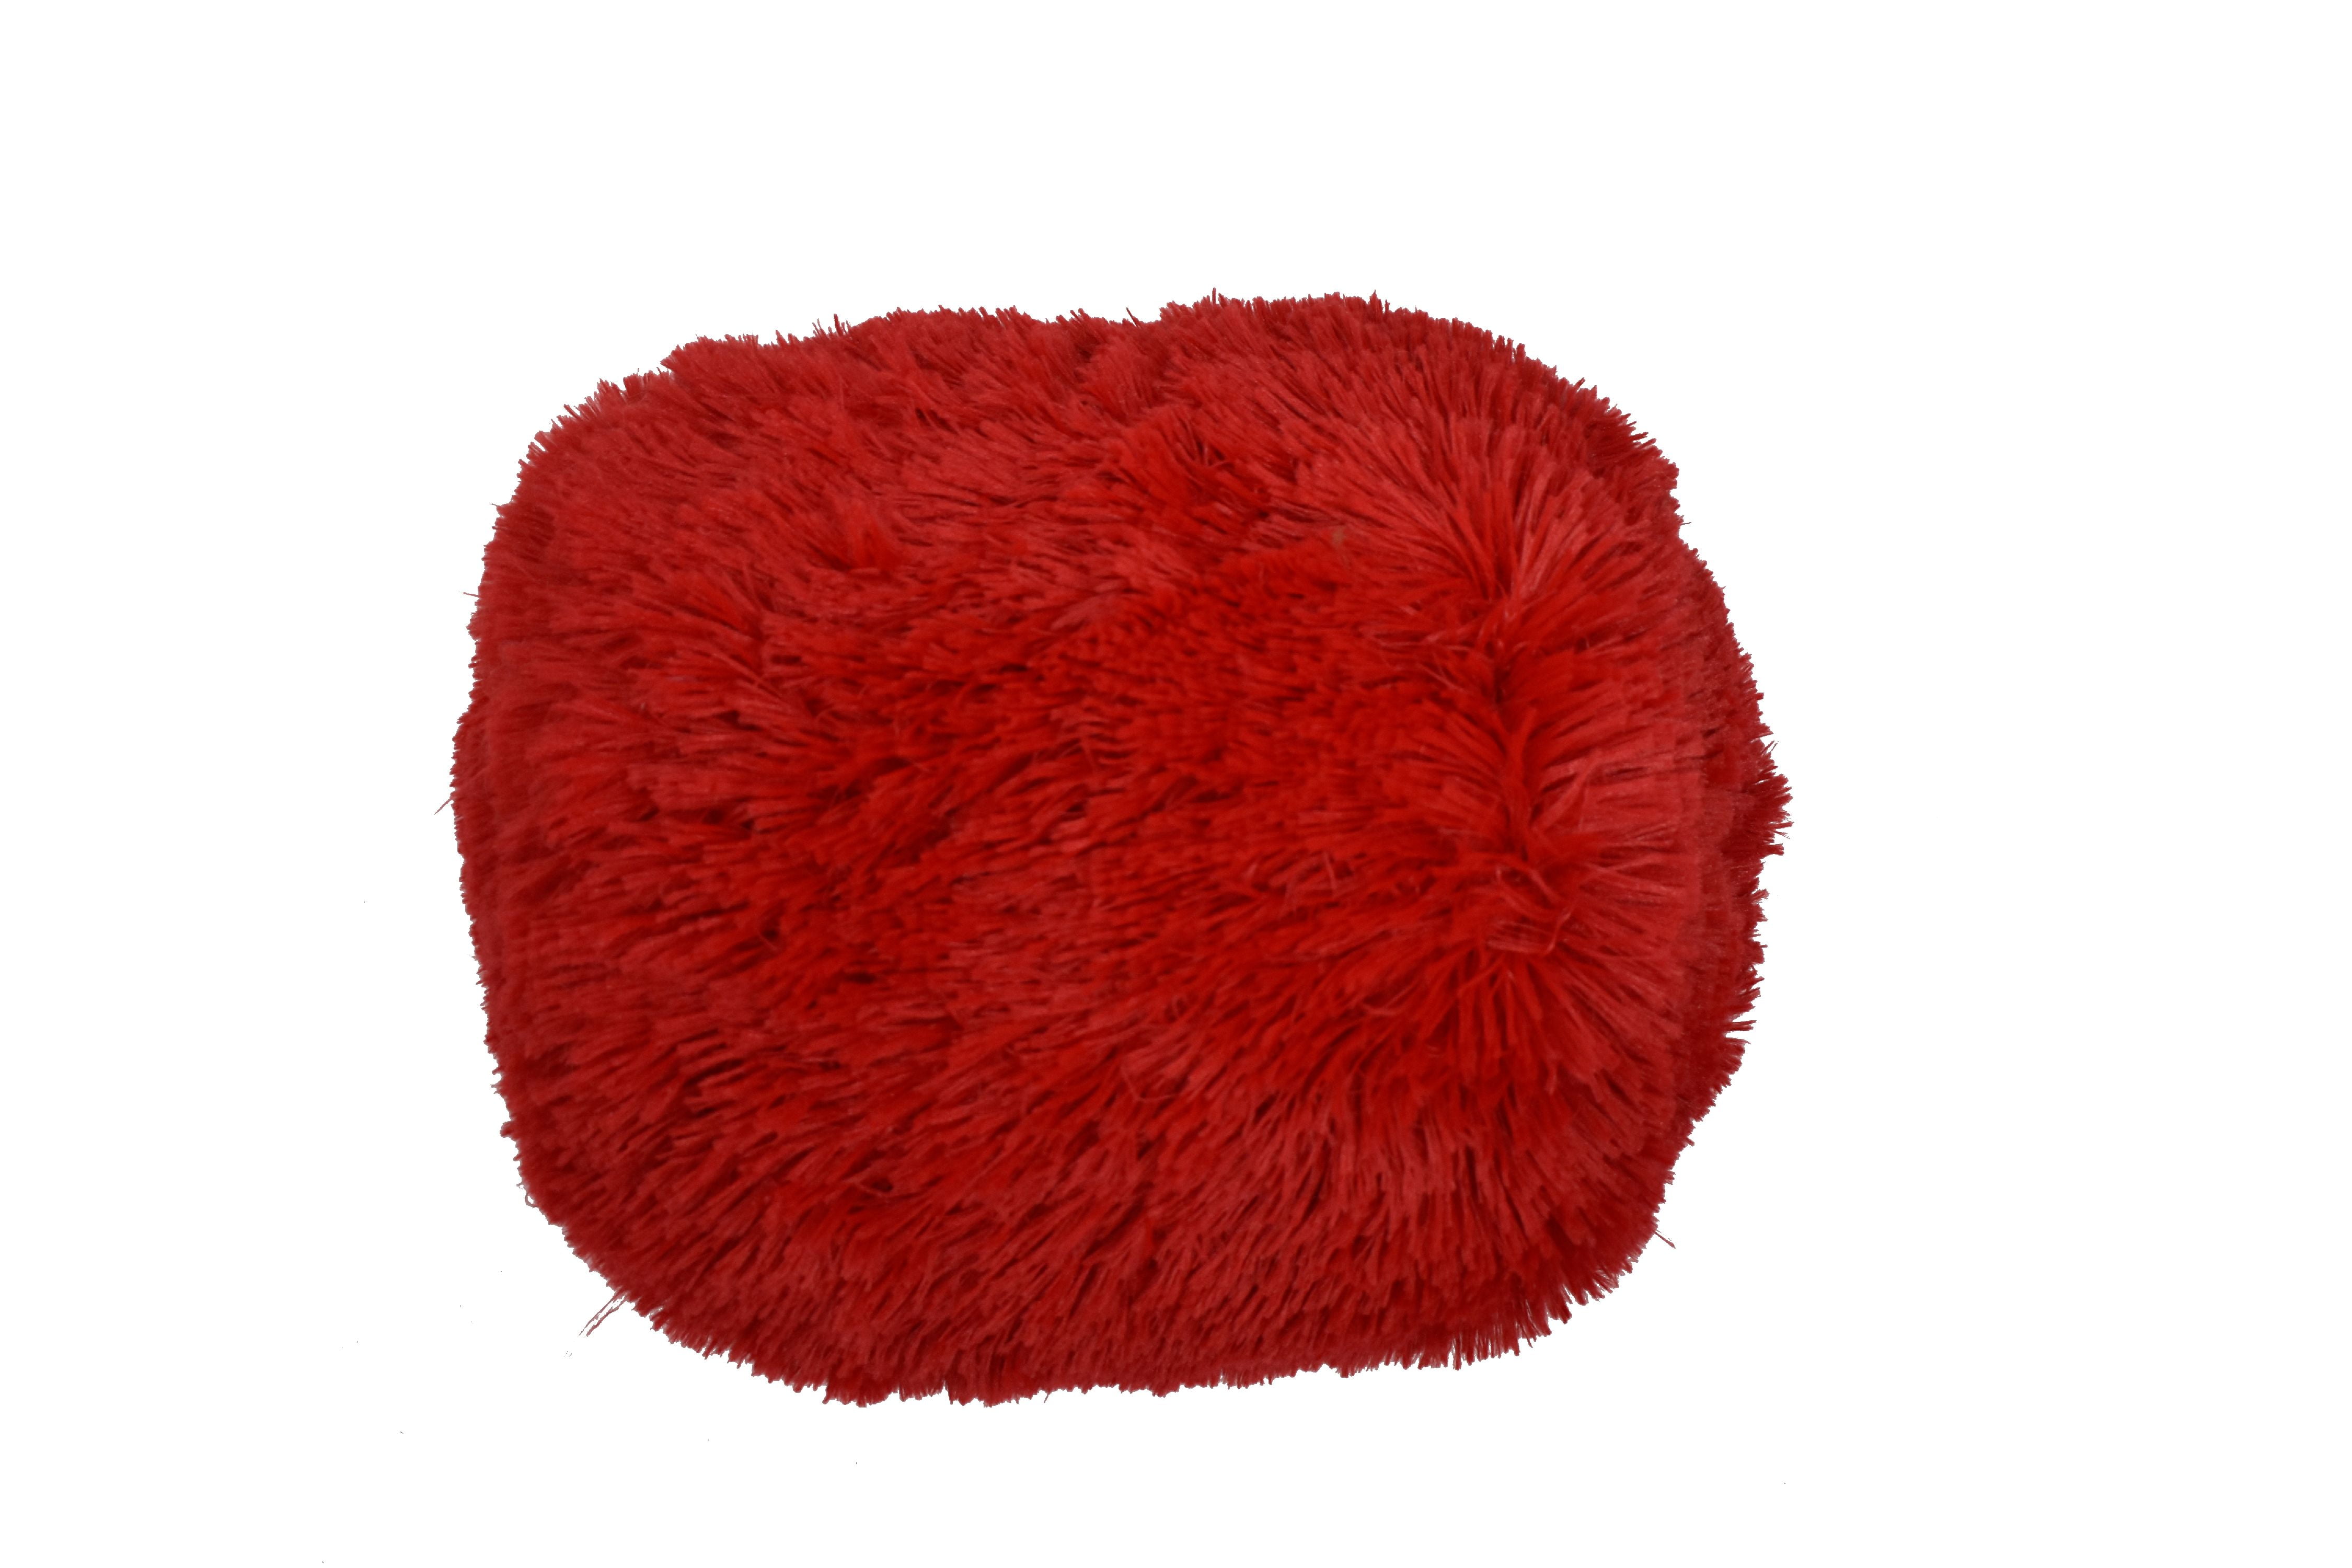 fluffy red pillows